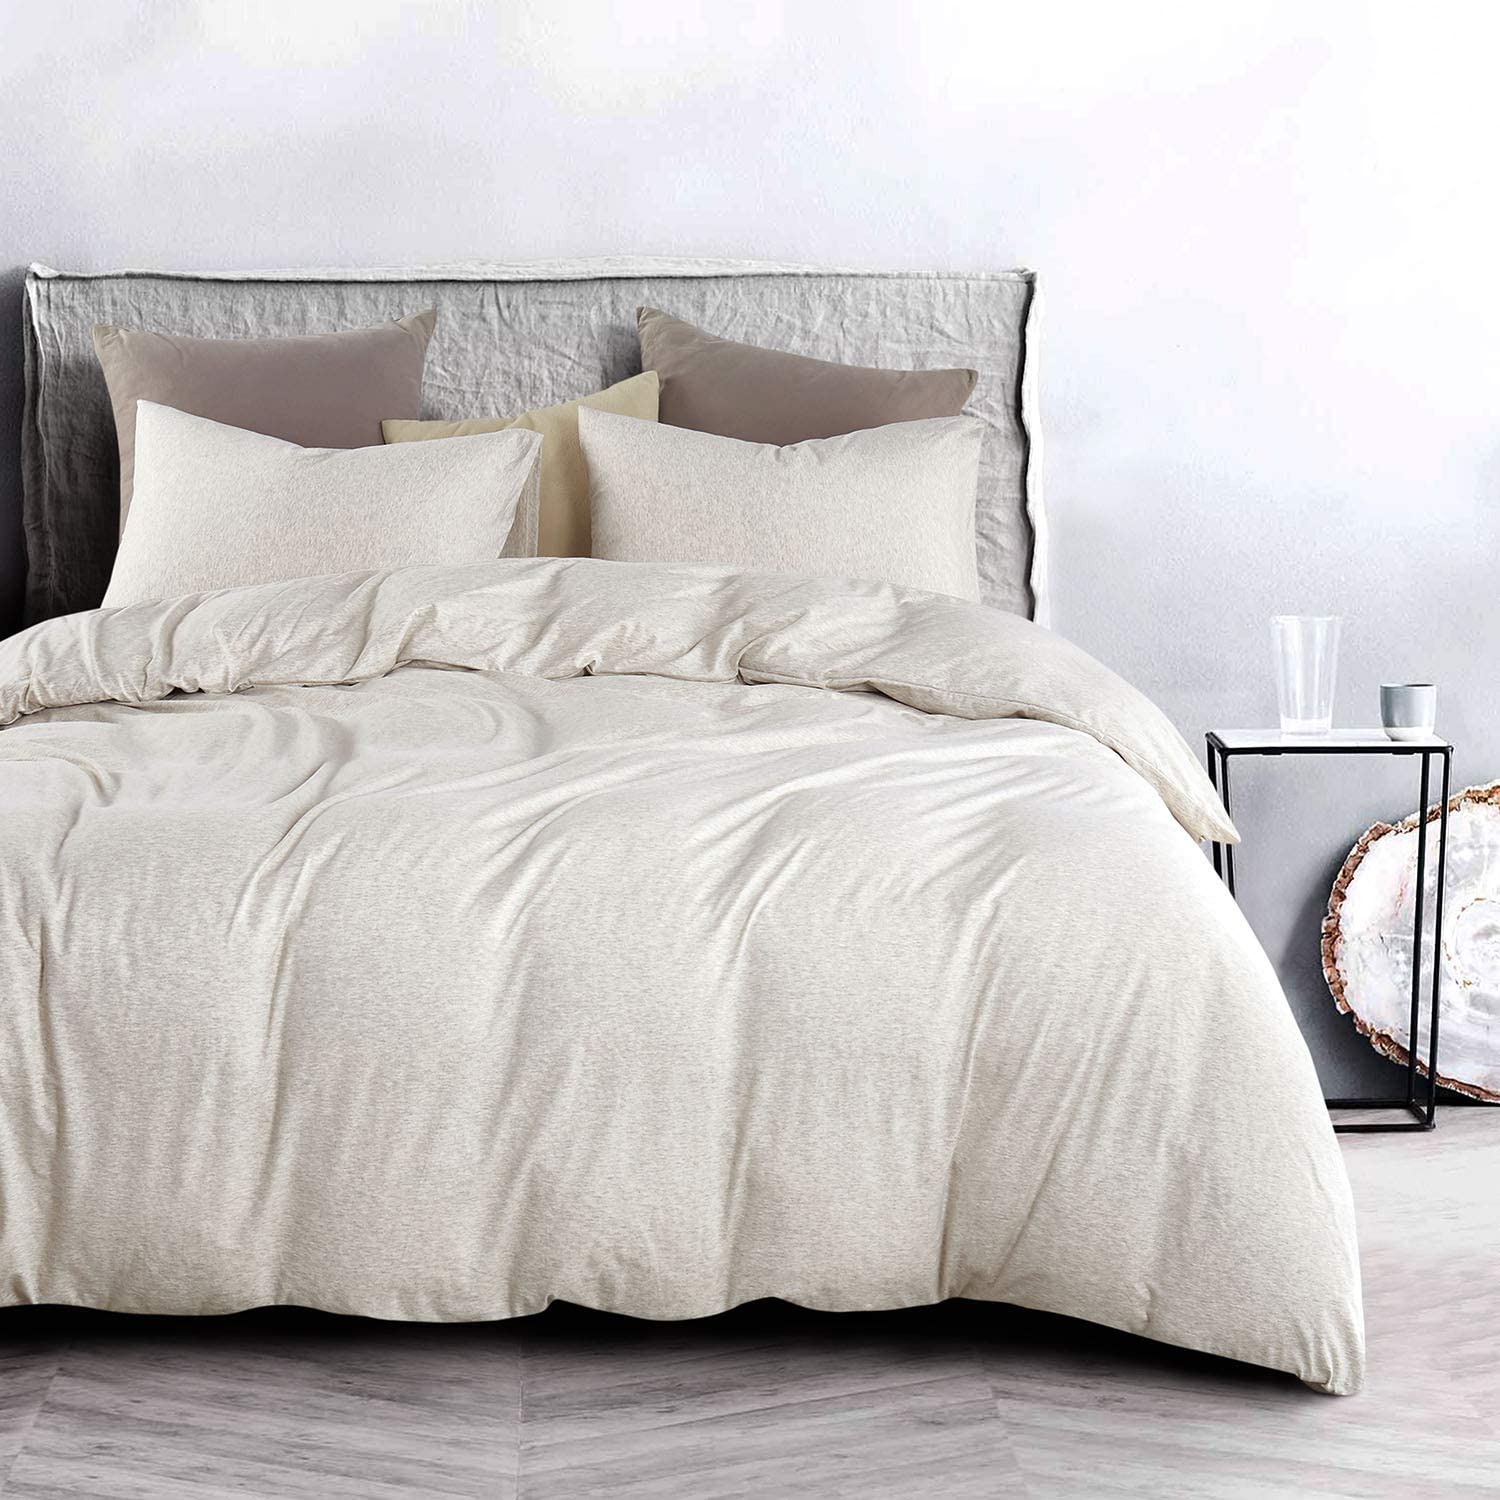 Wake In Cloud - Jersey Cotton Duvet Cover Set, Light Coffee Top Dyed ...